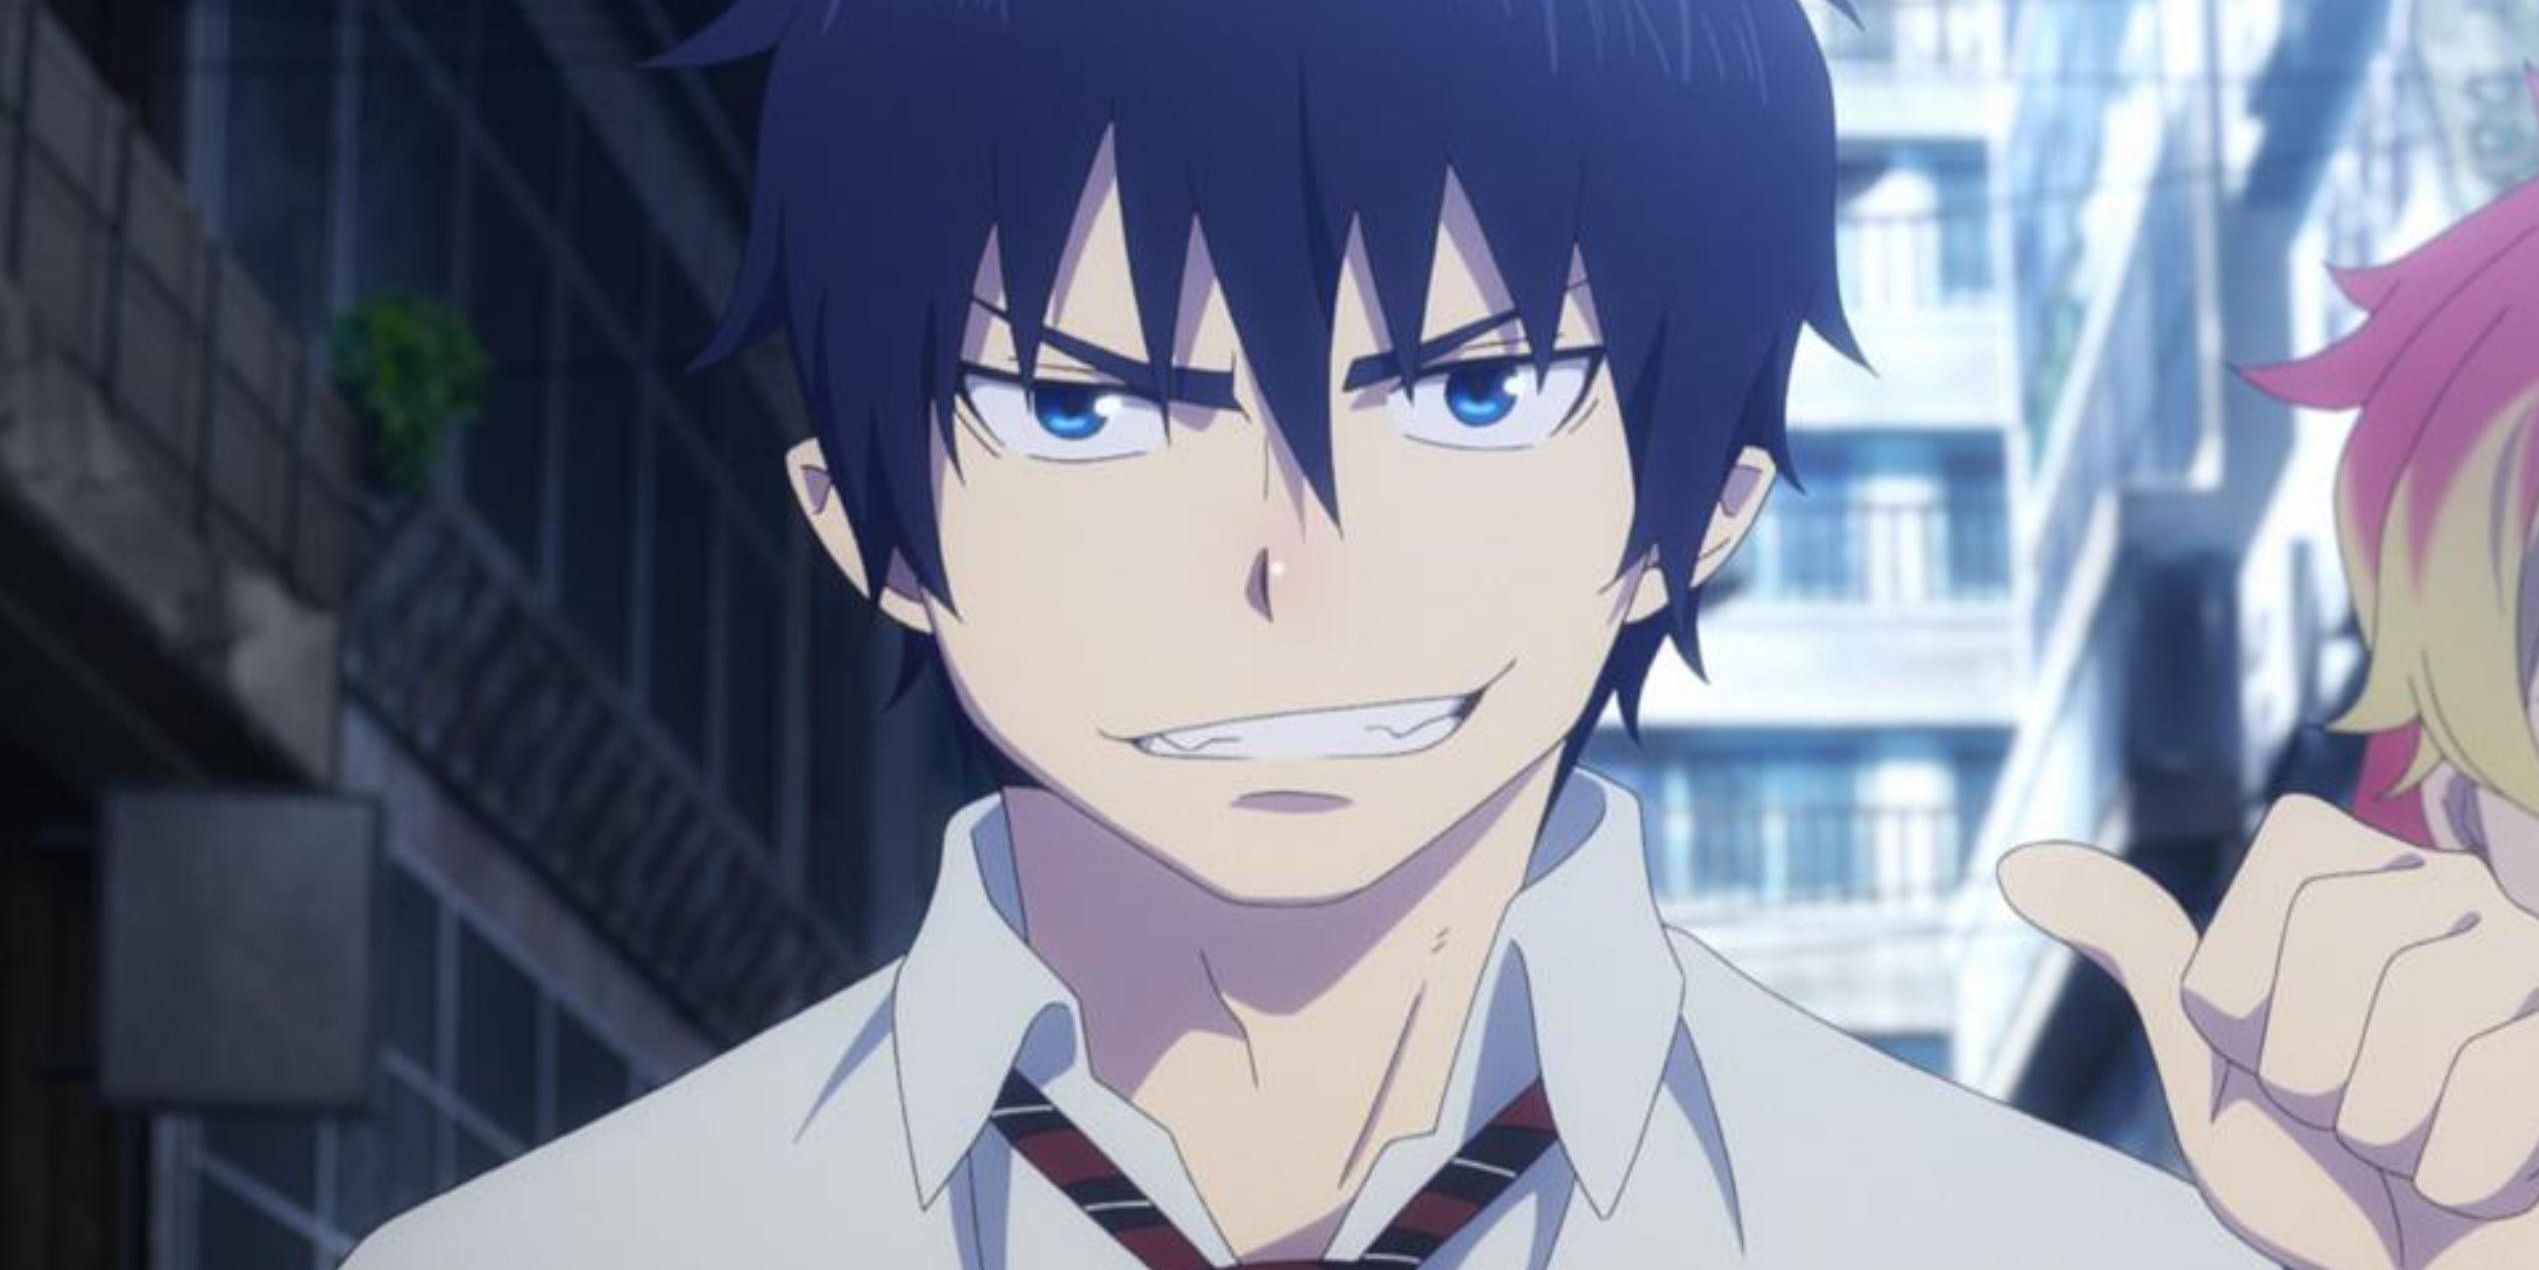 Rin Okumura from Blue Exorcist is pictured